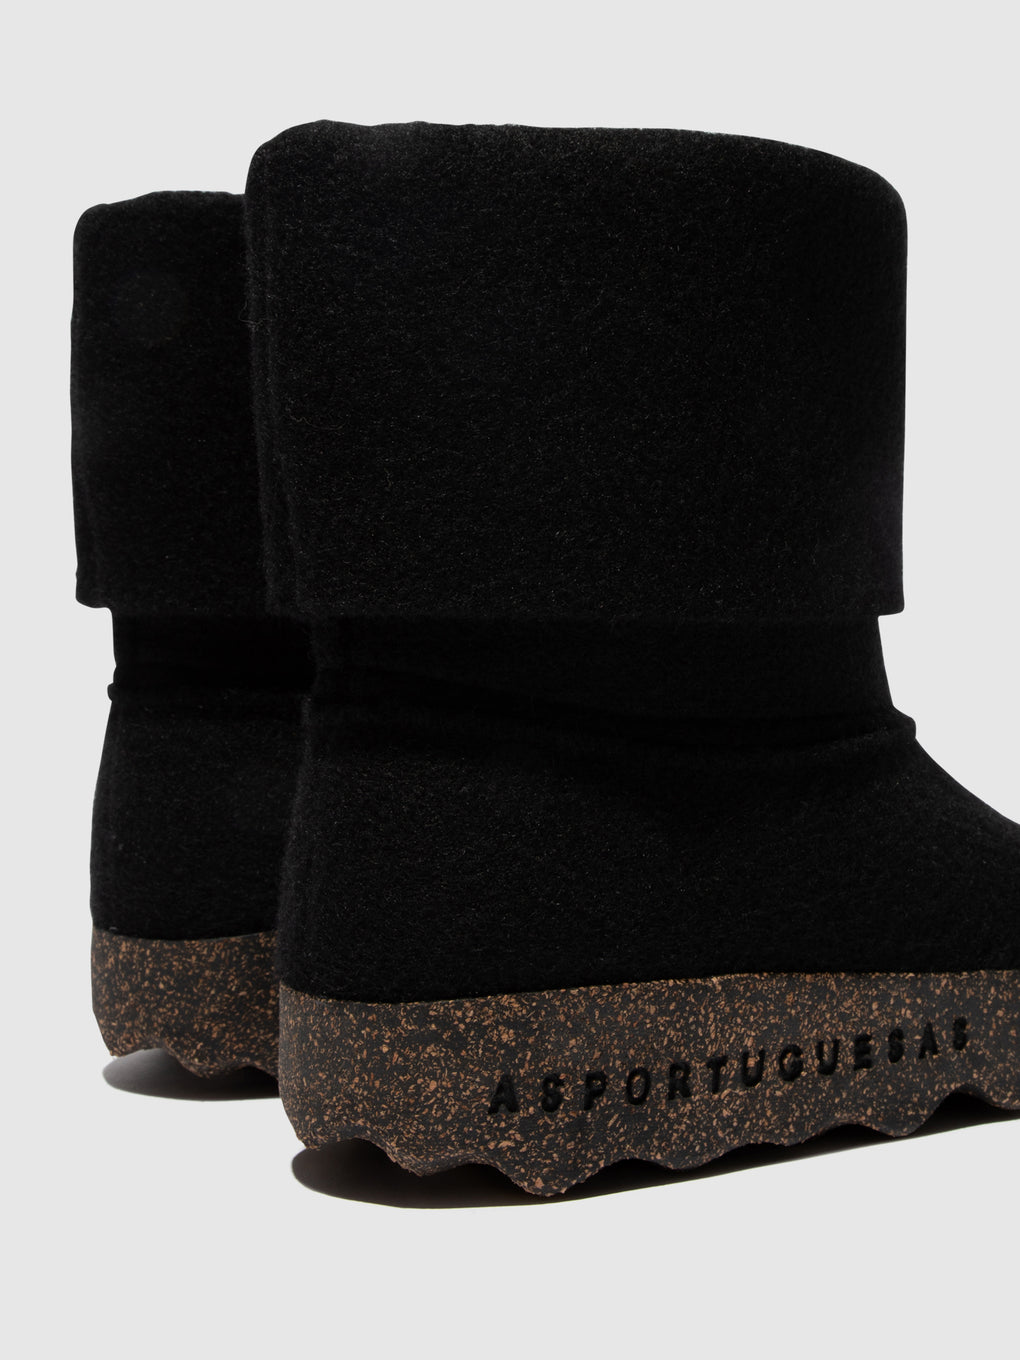 Round Toe Boots CADY BLACK